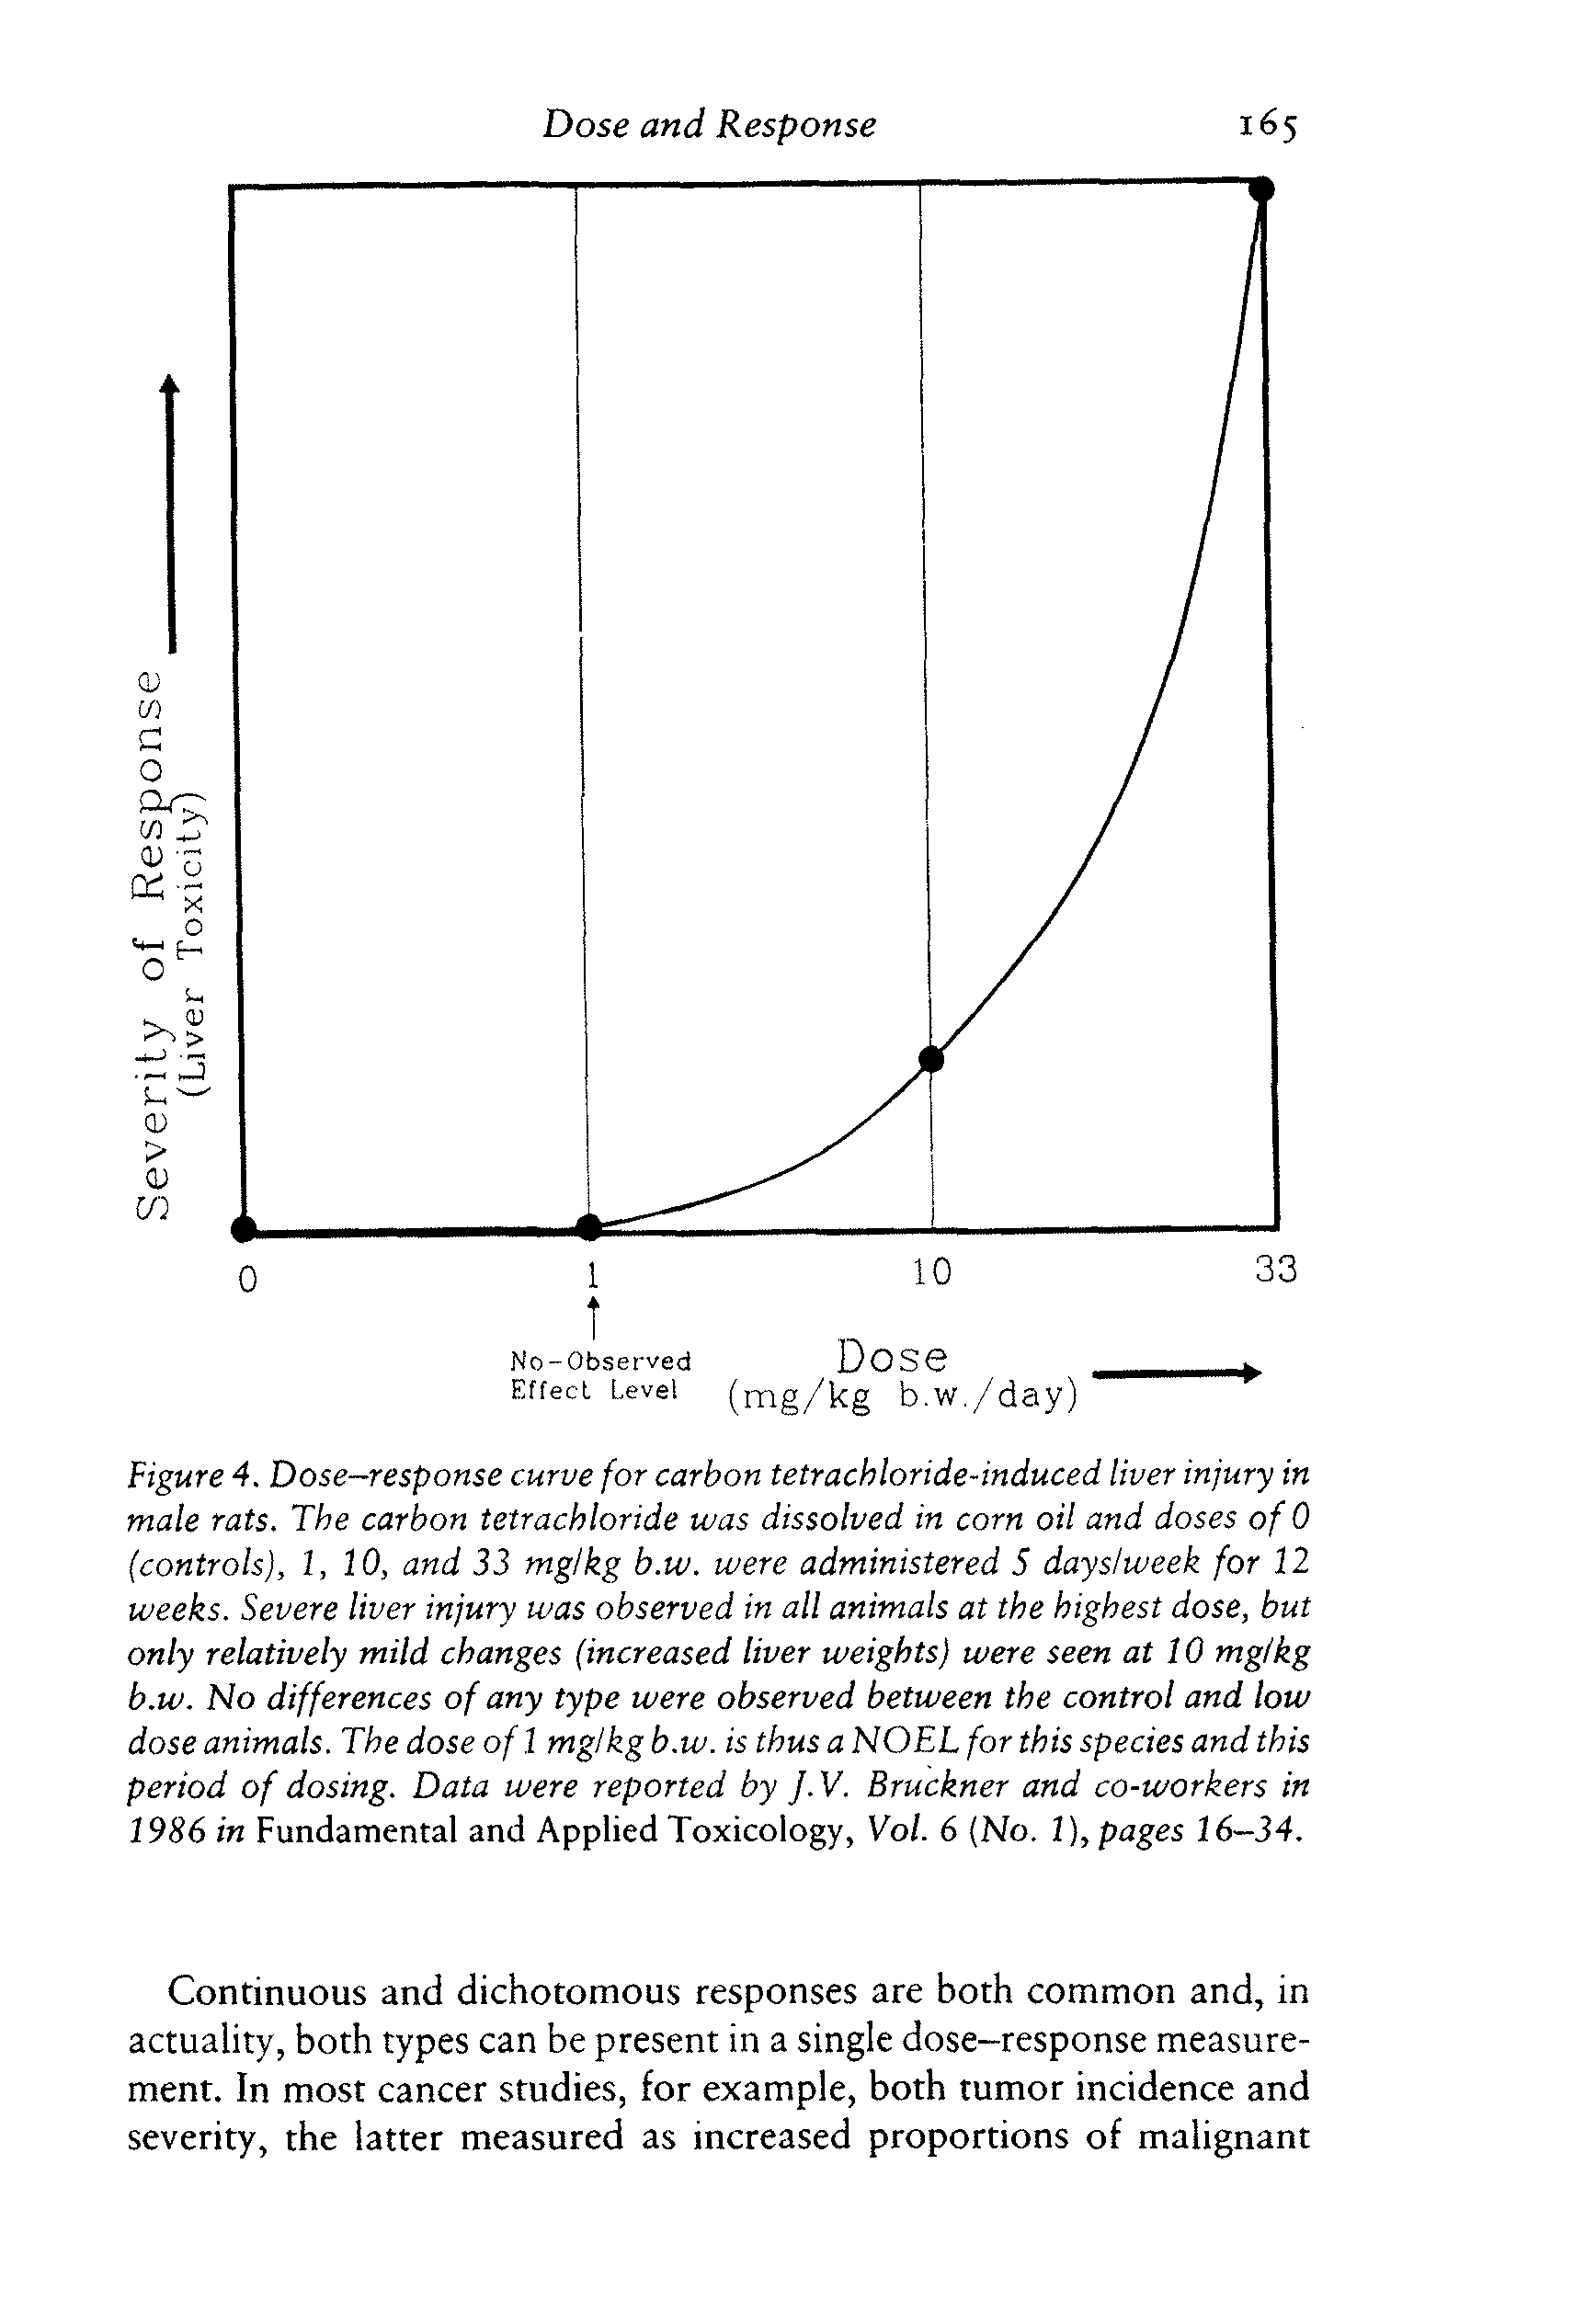 Figure 4. Dose-response curve for carbon tetrachloride-induced liver injury in male rats. The carbon tetrachloride was dissolved in corn oil and doses of 0 (controls), l, 10, and 33 mg/kg b.w. were administered 5 dayslweek for 12 weeks. Severe liver injury was observed in all animals at the highest dose, but only relatively mild changes (increased liver weights) were seen at 10 mg/kg b.w. No differences of any type were observed between the control and low dose animals. The dose of 1 mg/kg b.w. is thus a NOEL for this species and this period of dosing. Data were reported by J.V. Bruckner and co-workers in 1986 in Fundamental and Applied Toxicology, Vol. 6 (No. 1), pages 16—34.